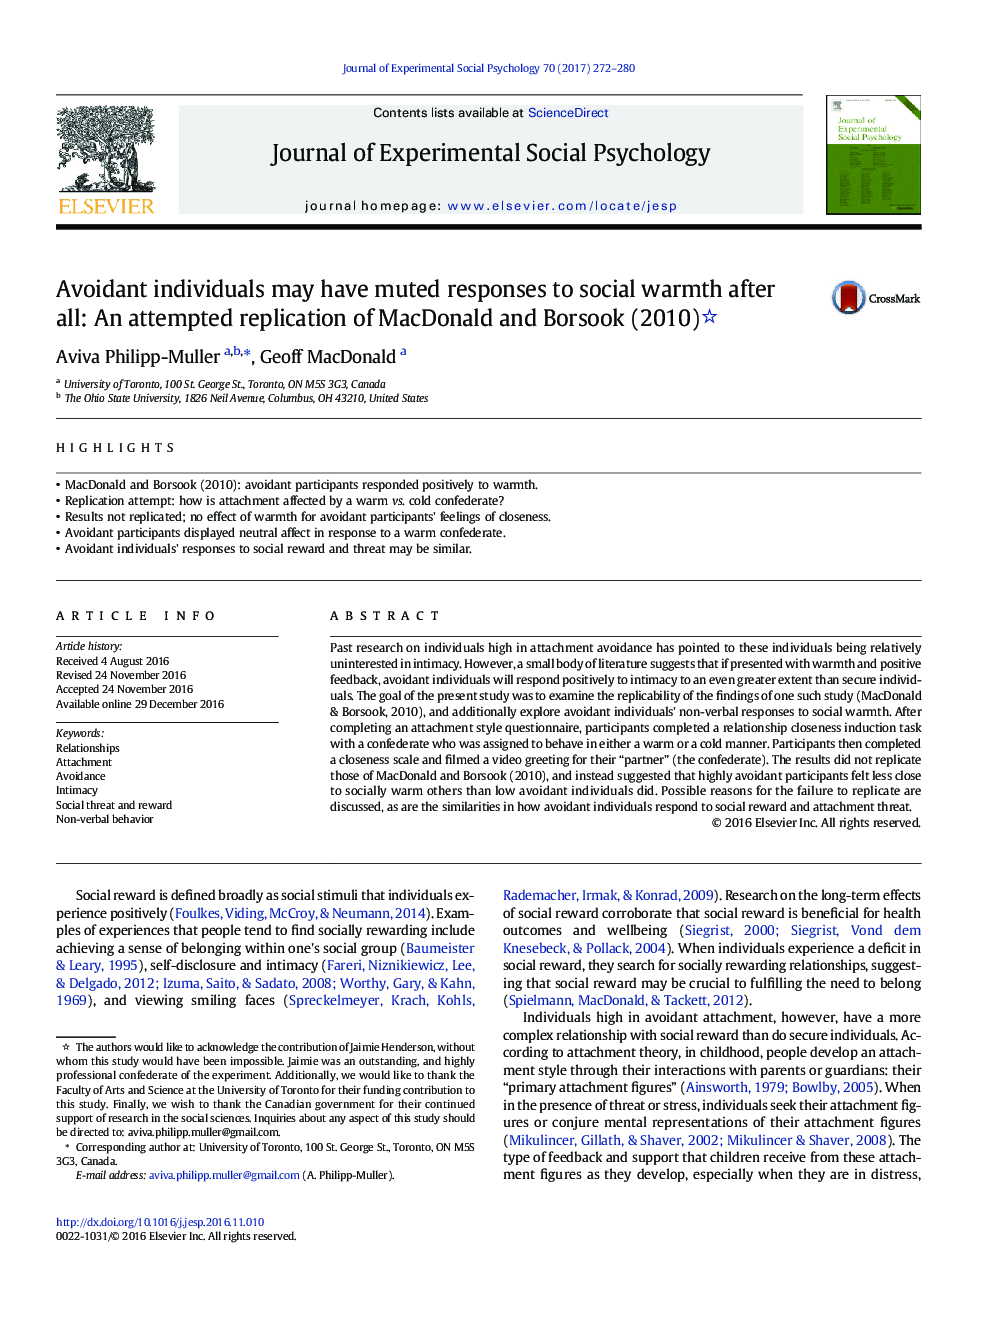 Avoidant individuals may have muted responses to social warmth after all: An attempted replication of MacDonald and Borsook (2010)